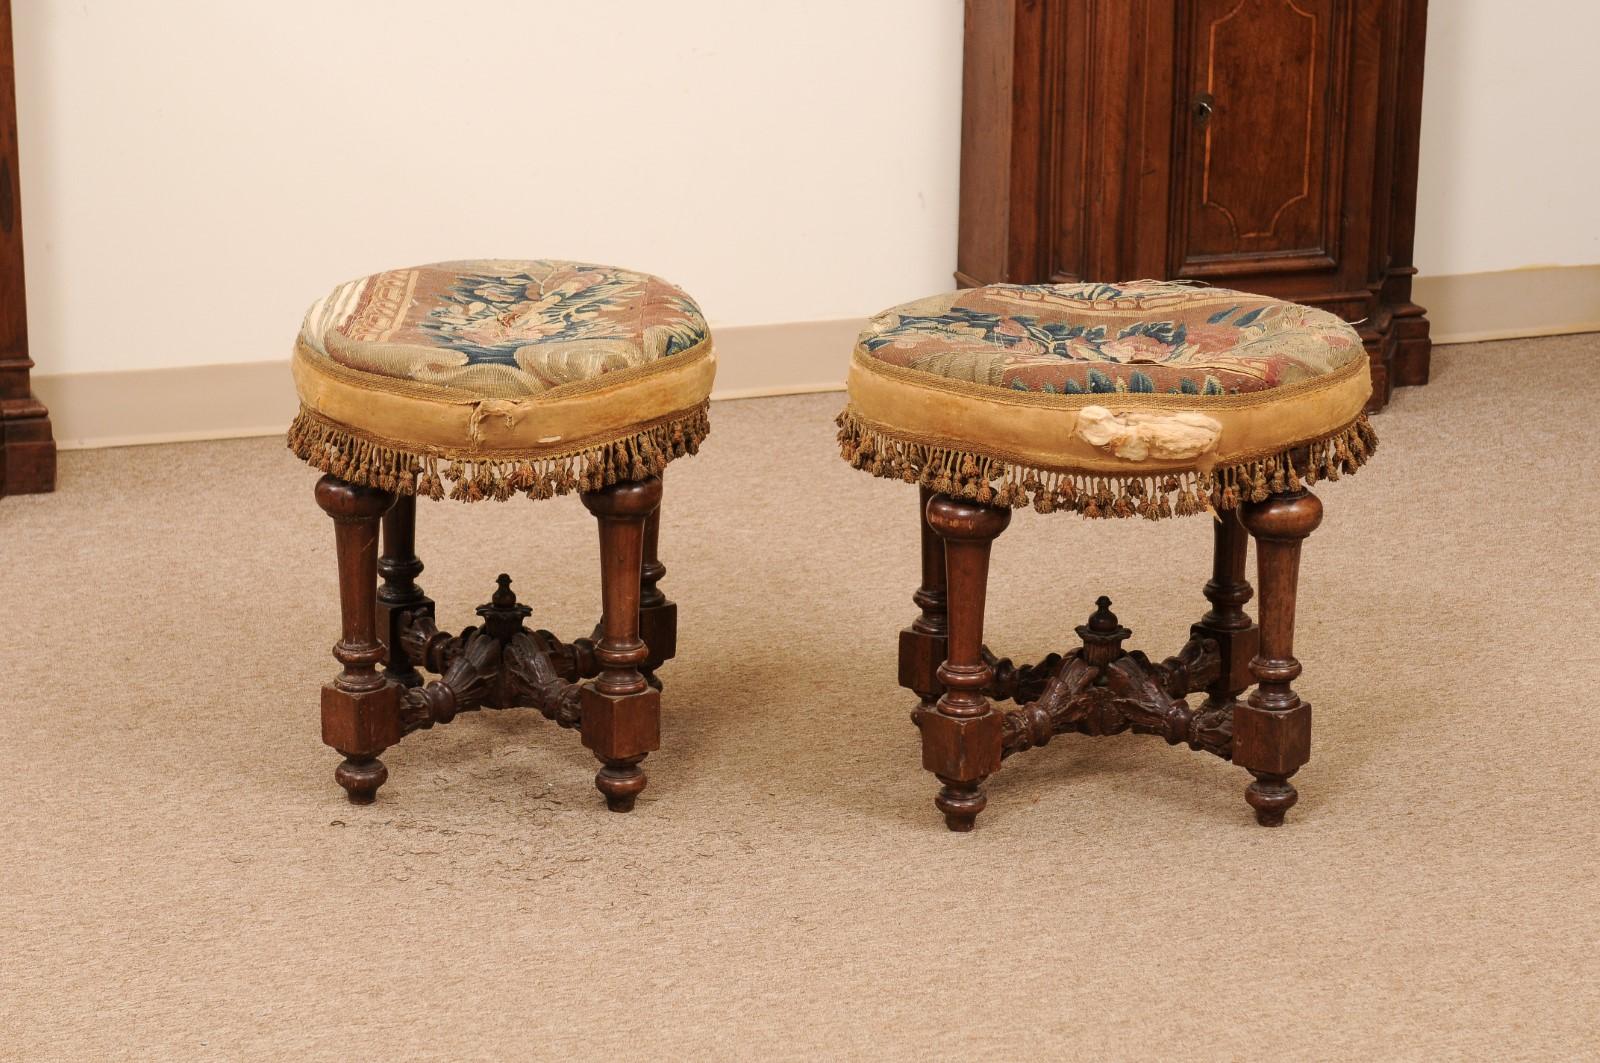 Pair of Oval 18th Century Italian Walnut Benches with Turned Legs  For Sale 5